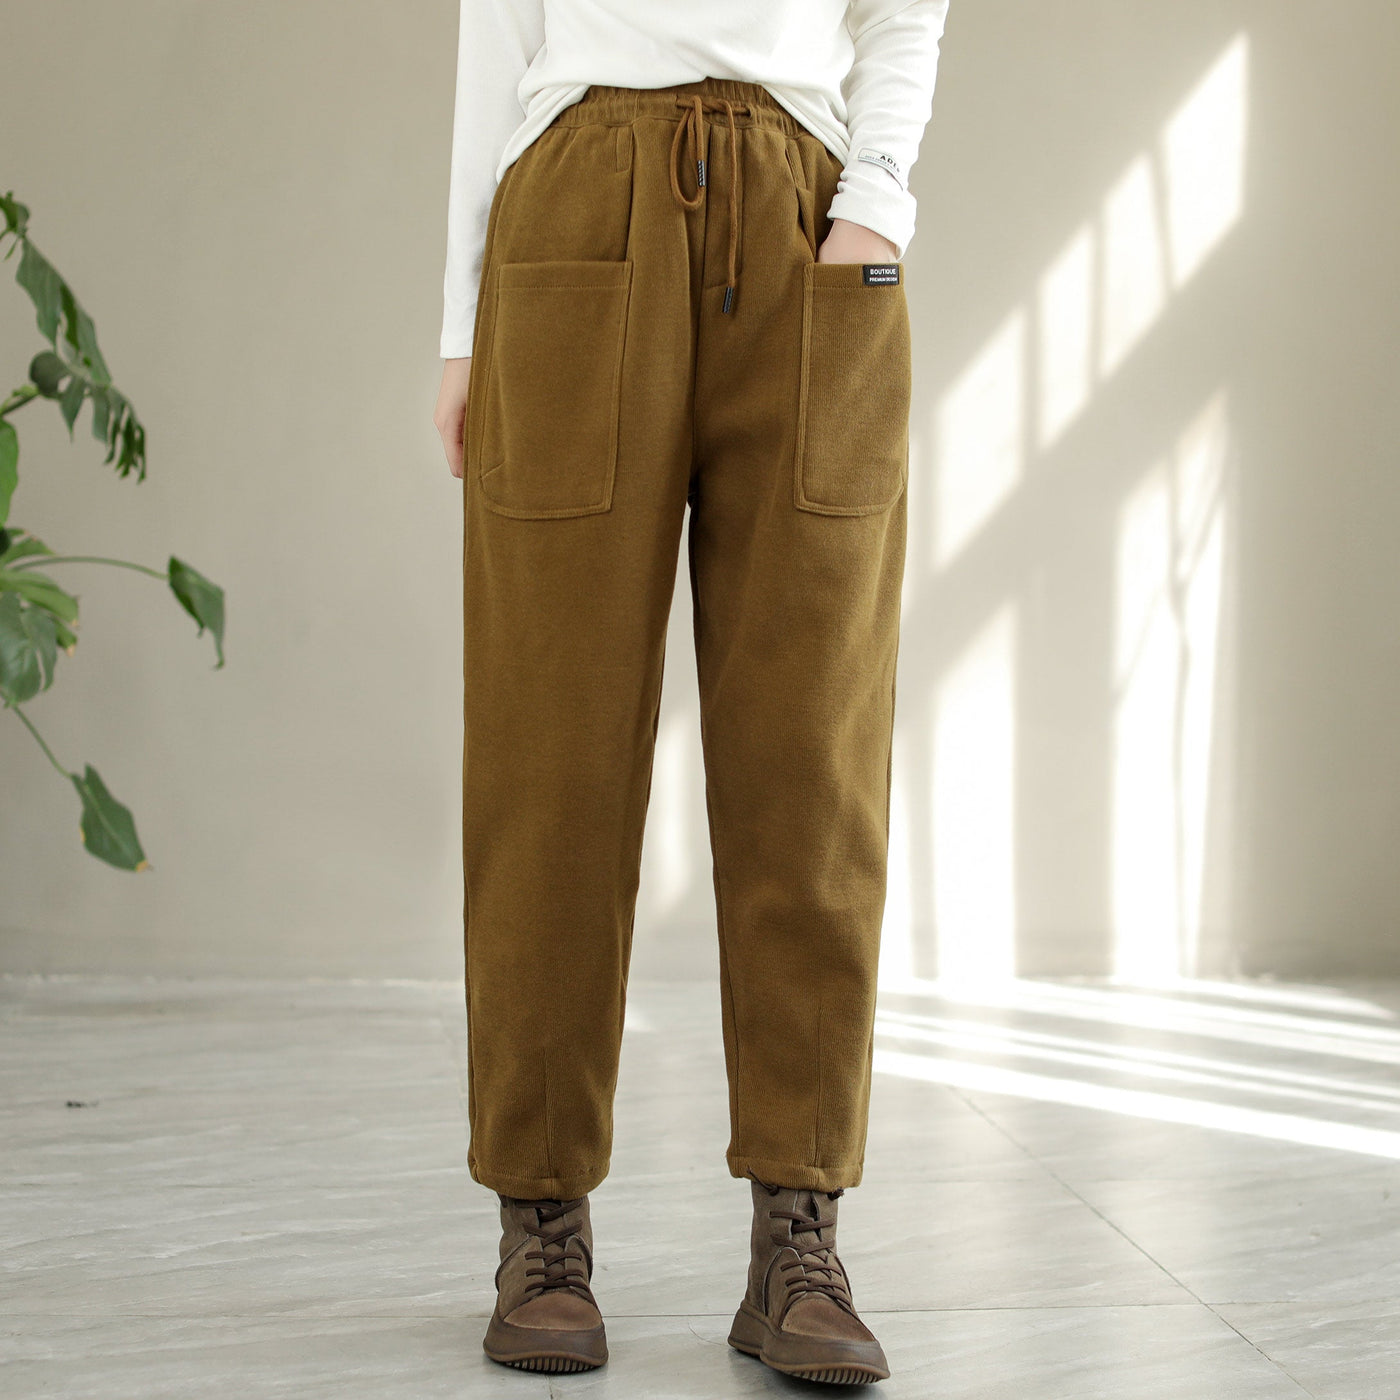 Women Winter Cotton Furred Solid Pants Oct 2022 New Arrival M Brown 